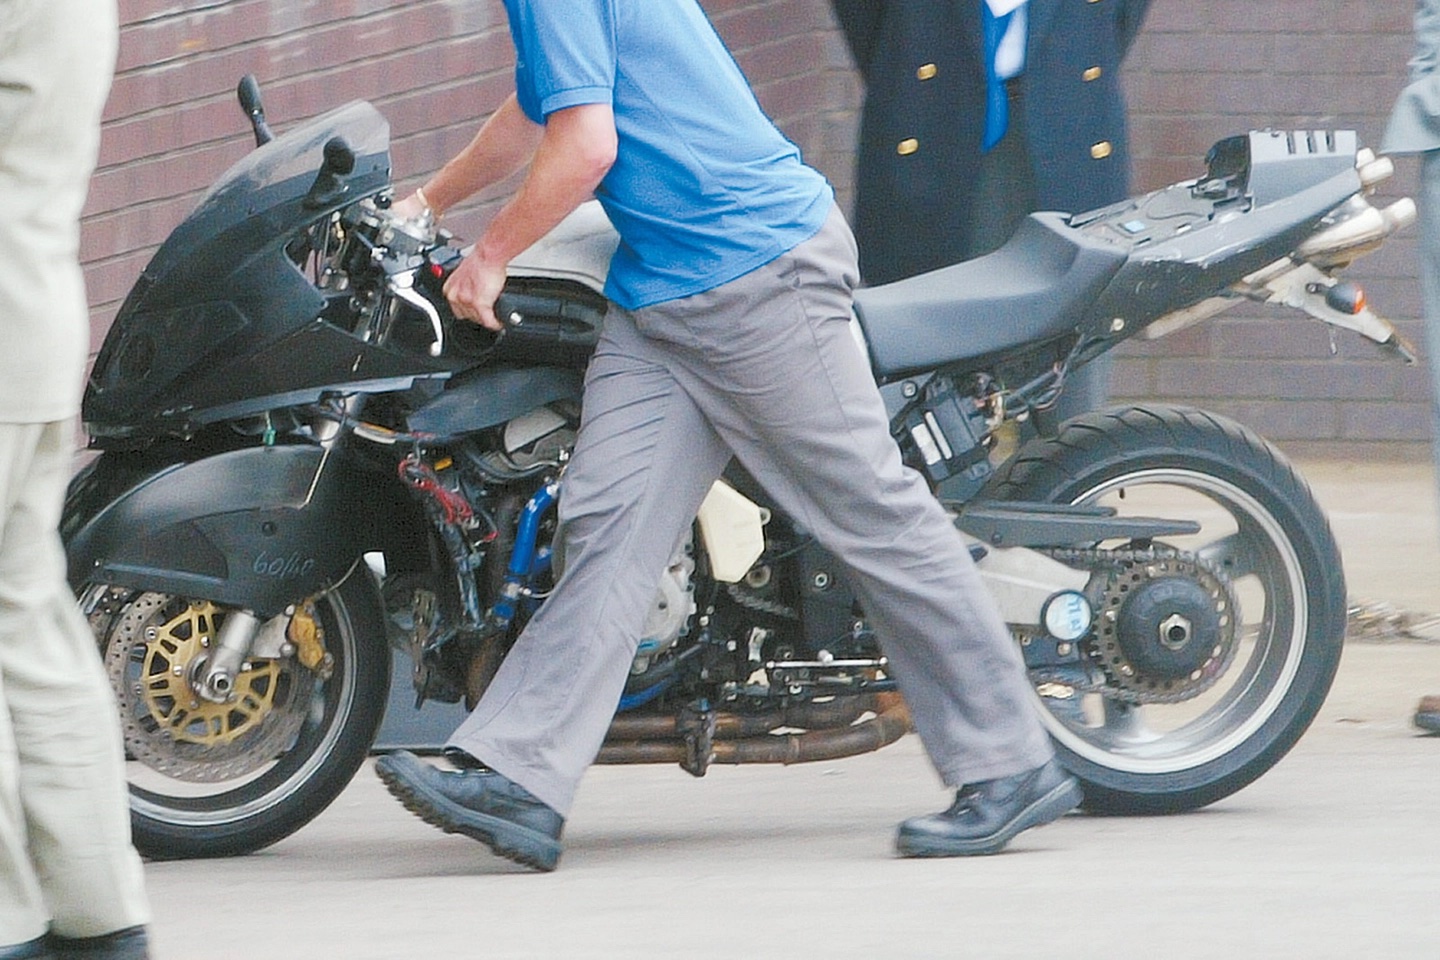 A 1275cc bike seen outside Triumph's Hinckley factory in September of 2003 - shortly after the project was canned, despite Triumph spending an astronomical £4 million to get the thing up and running. By the way, rumour has it this was a "Hurricane." Media (and tidbits) sourced from MCN.